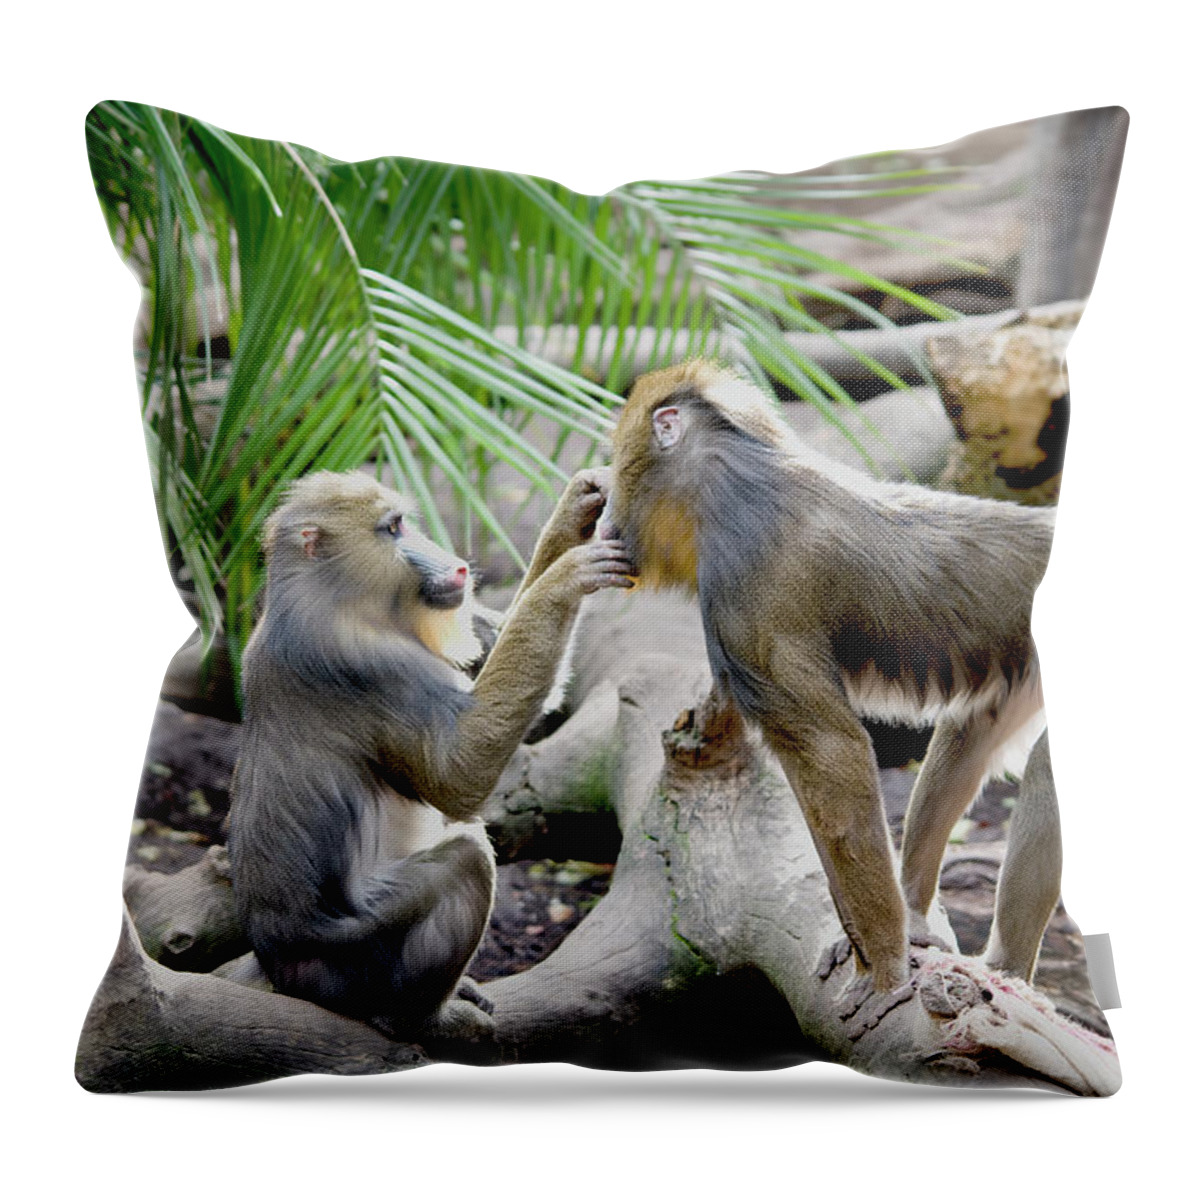 Care Throw Pillow featuring the photograph A Monkey Grooming Another Monkey by Jim Julien / Design Pics